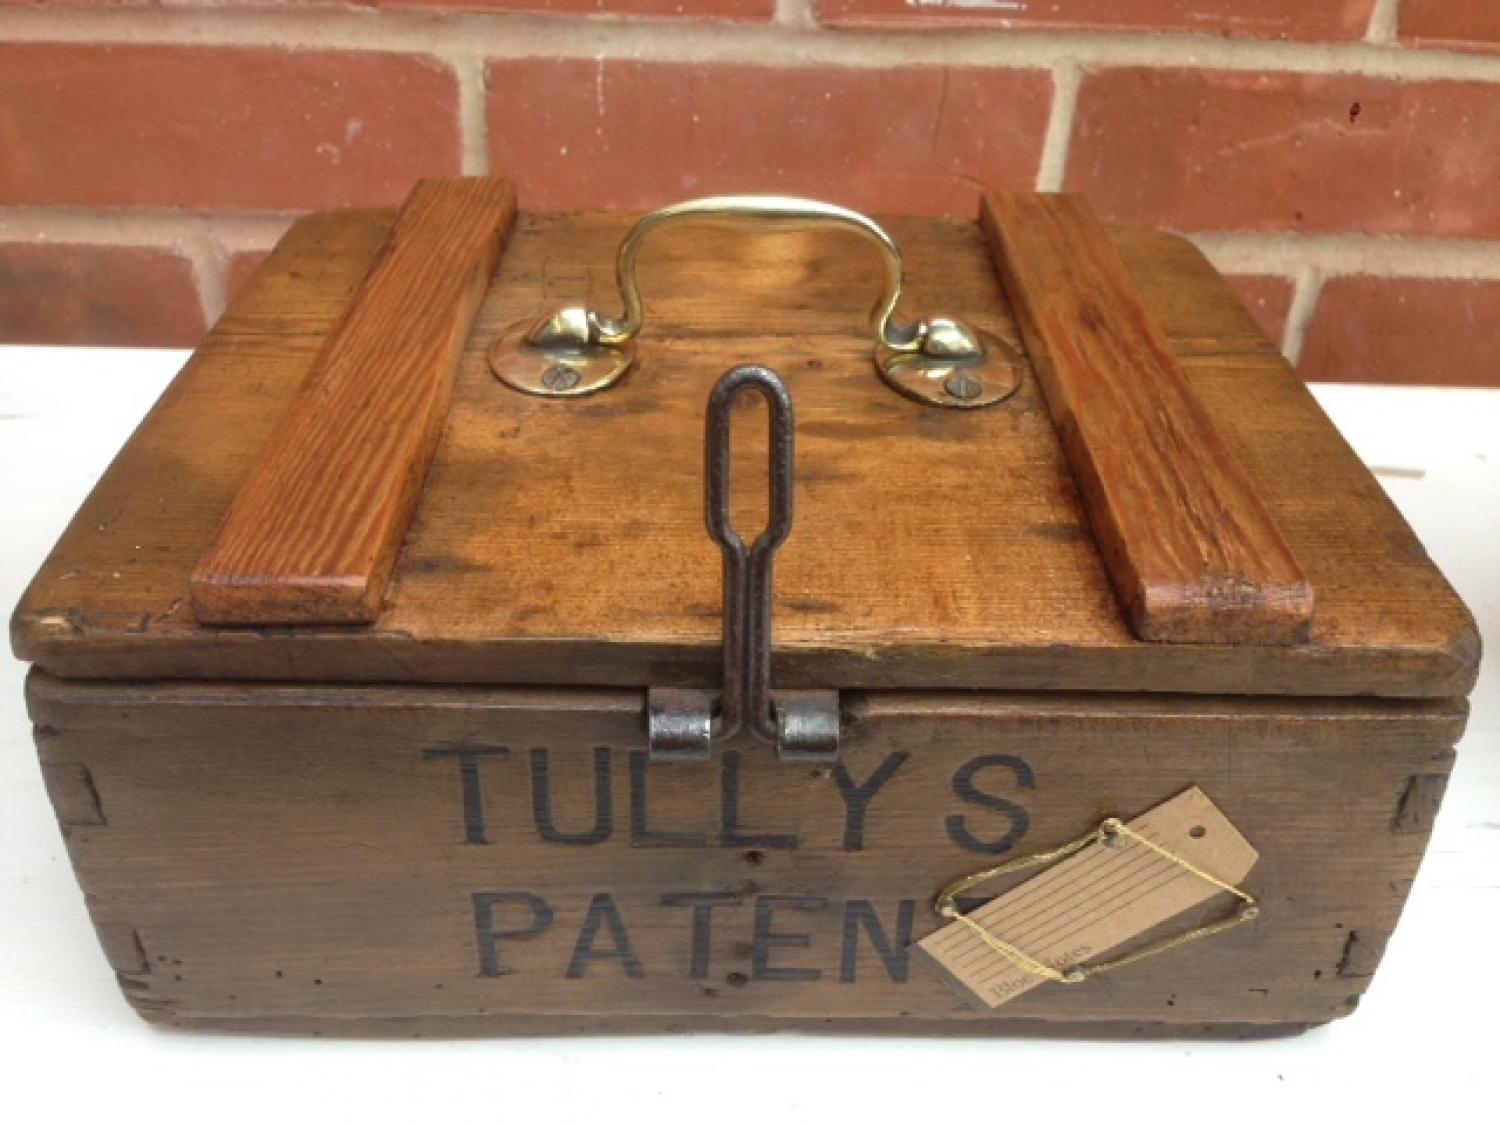 Antique Egg Box Tulleys Patent